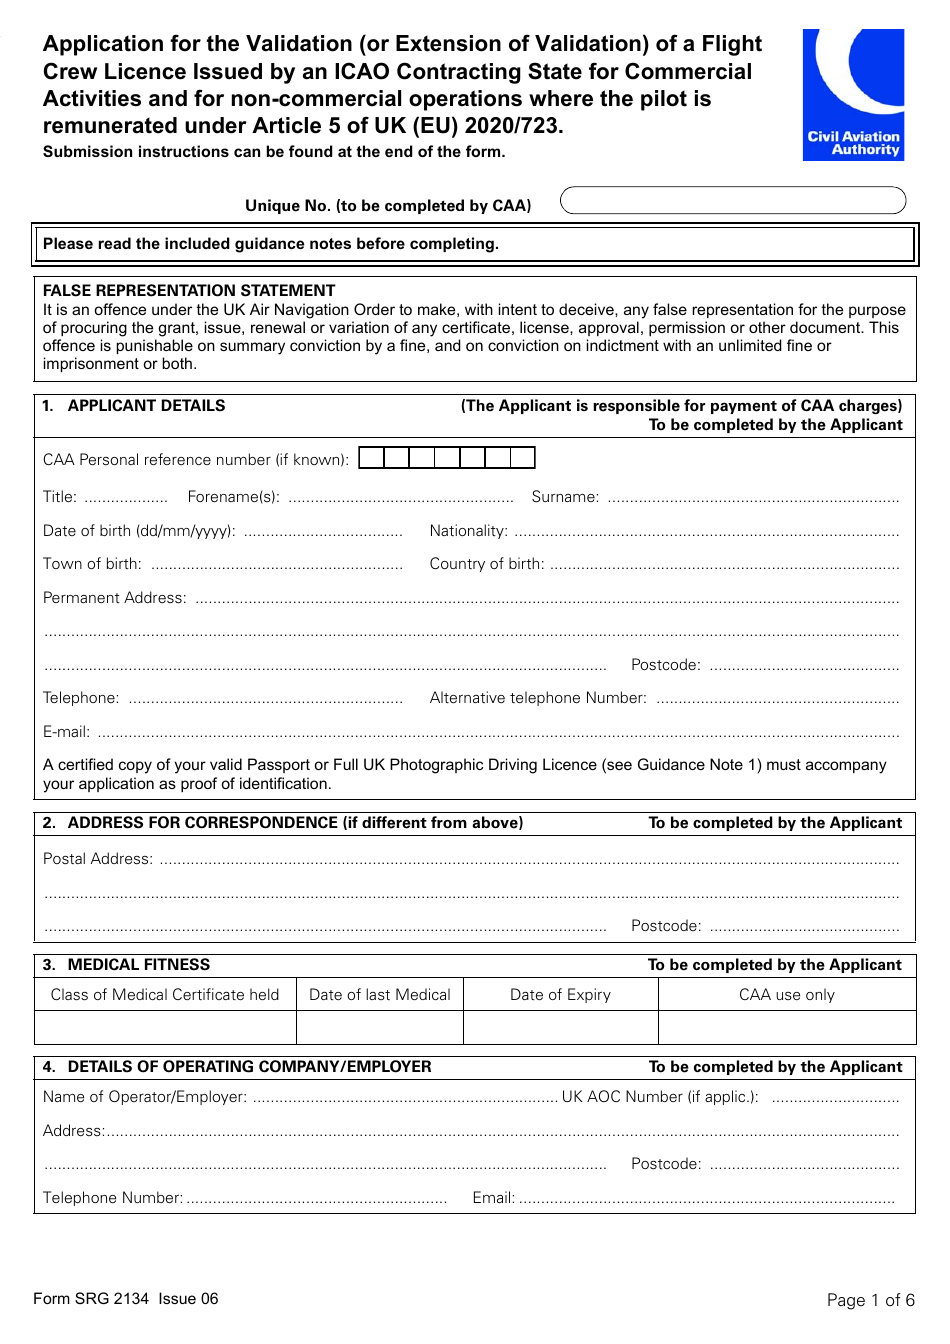 Form SRG2134 Application for the Validation (Or Extension of Validation) of a Flight Crew Licence Issued by an Icao Contracting State for Commercial Activities and for Non-commercial Operations Where the Pilot Is Remunerated Under Article 5 of UK (Eu) 2020 / 723 - United Kingdom, Page 1